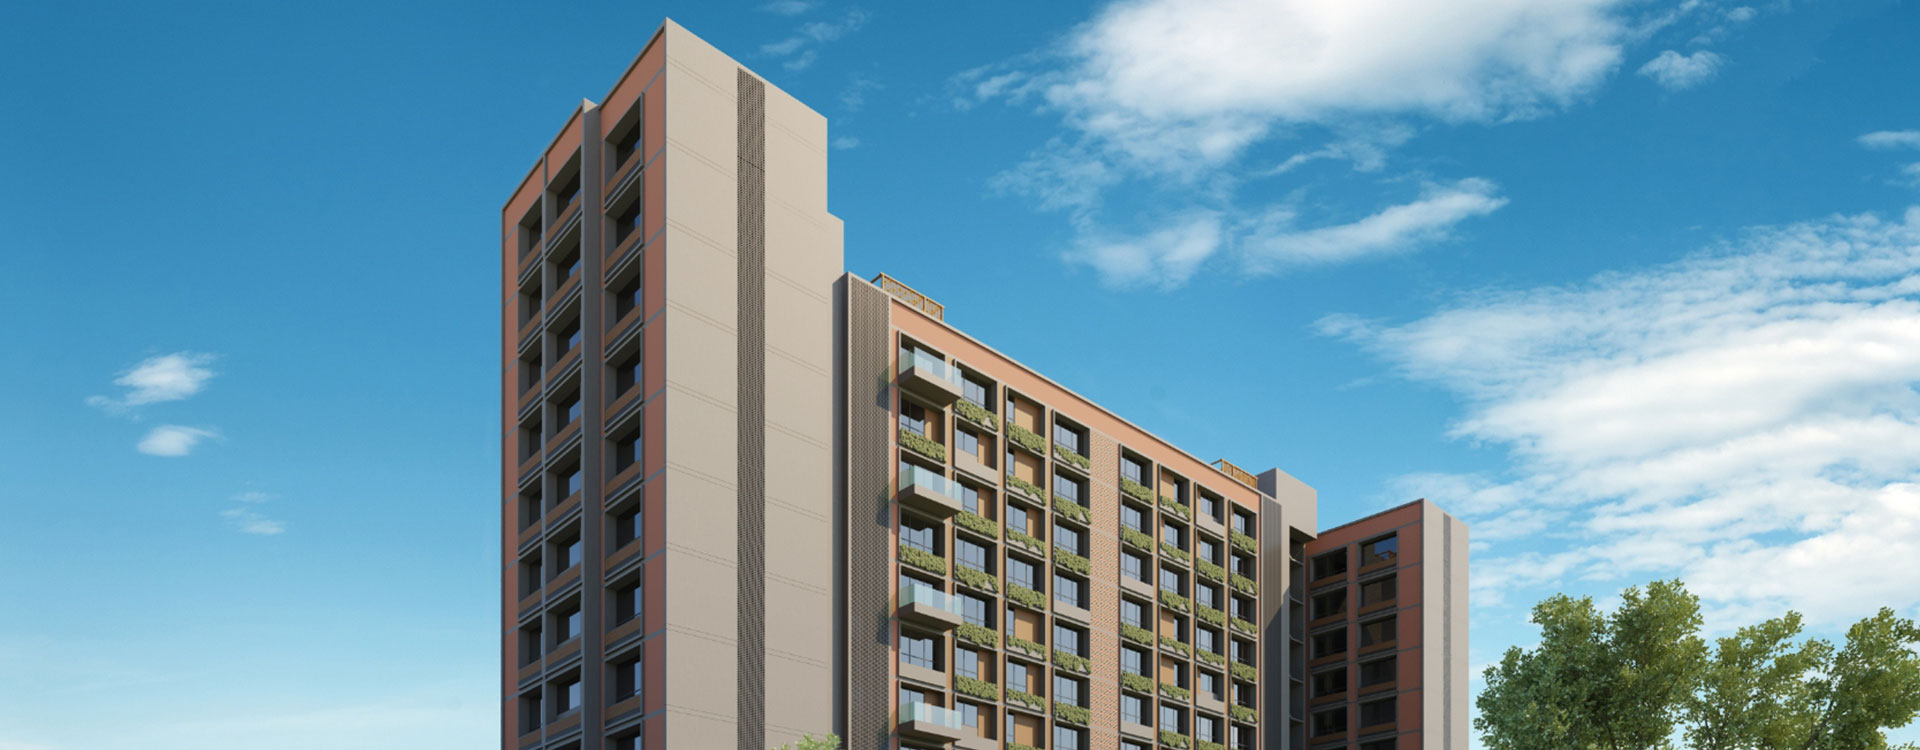 Zion Windfield residential property in ahmedabad